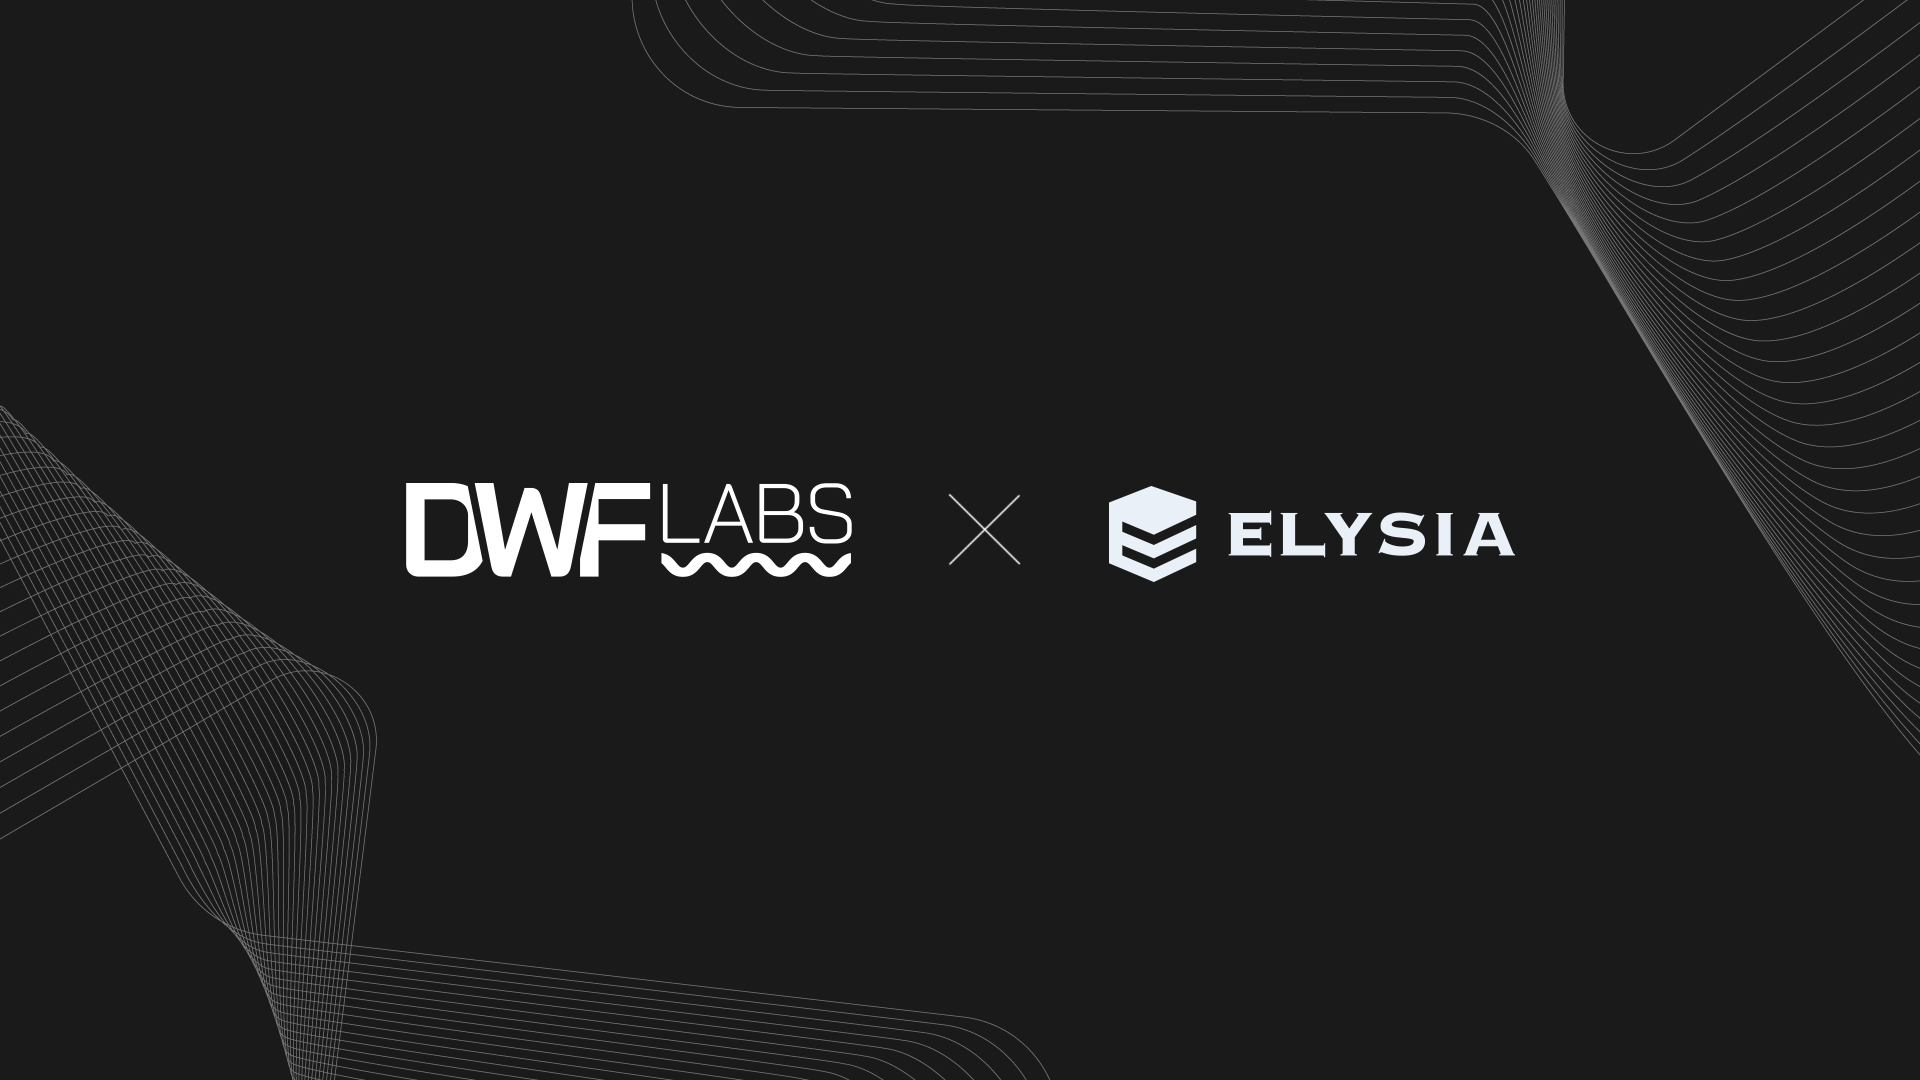 ELYSIA and DWF Labs Partner to Accelerate Innovation in Global Asset Tokenization